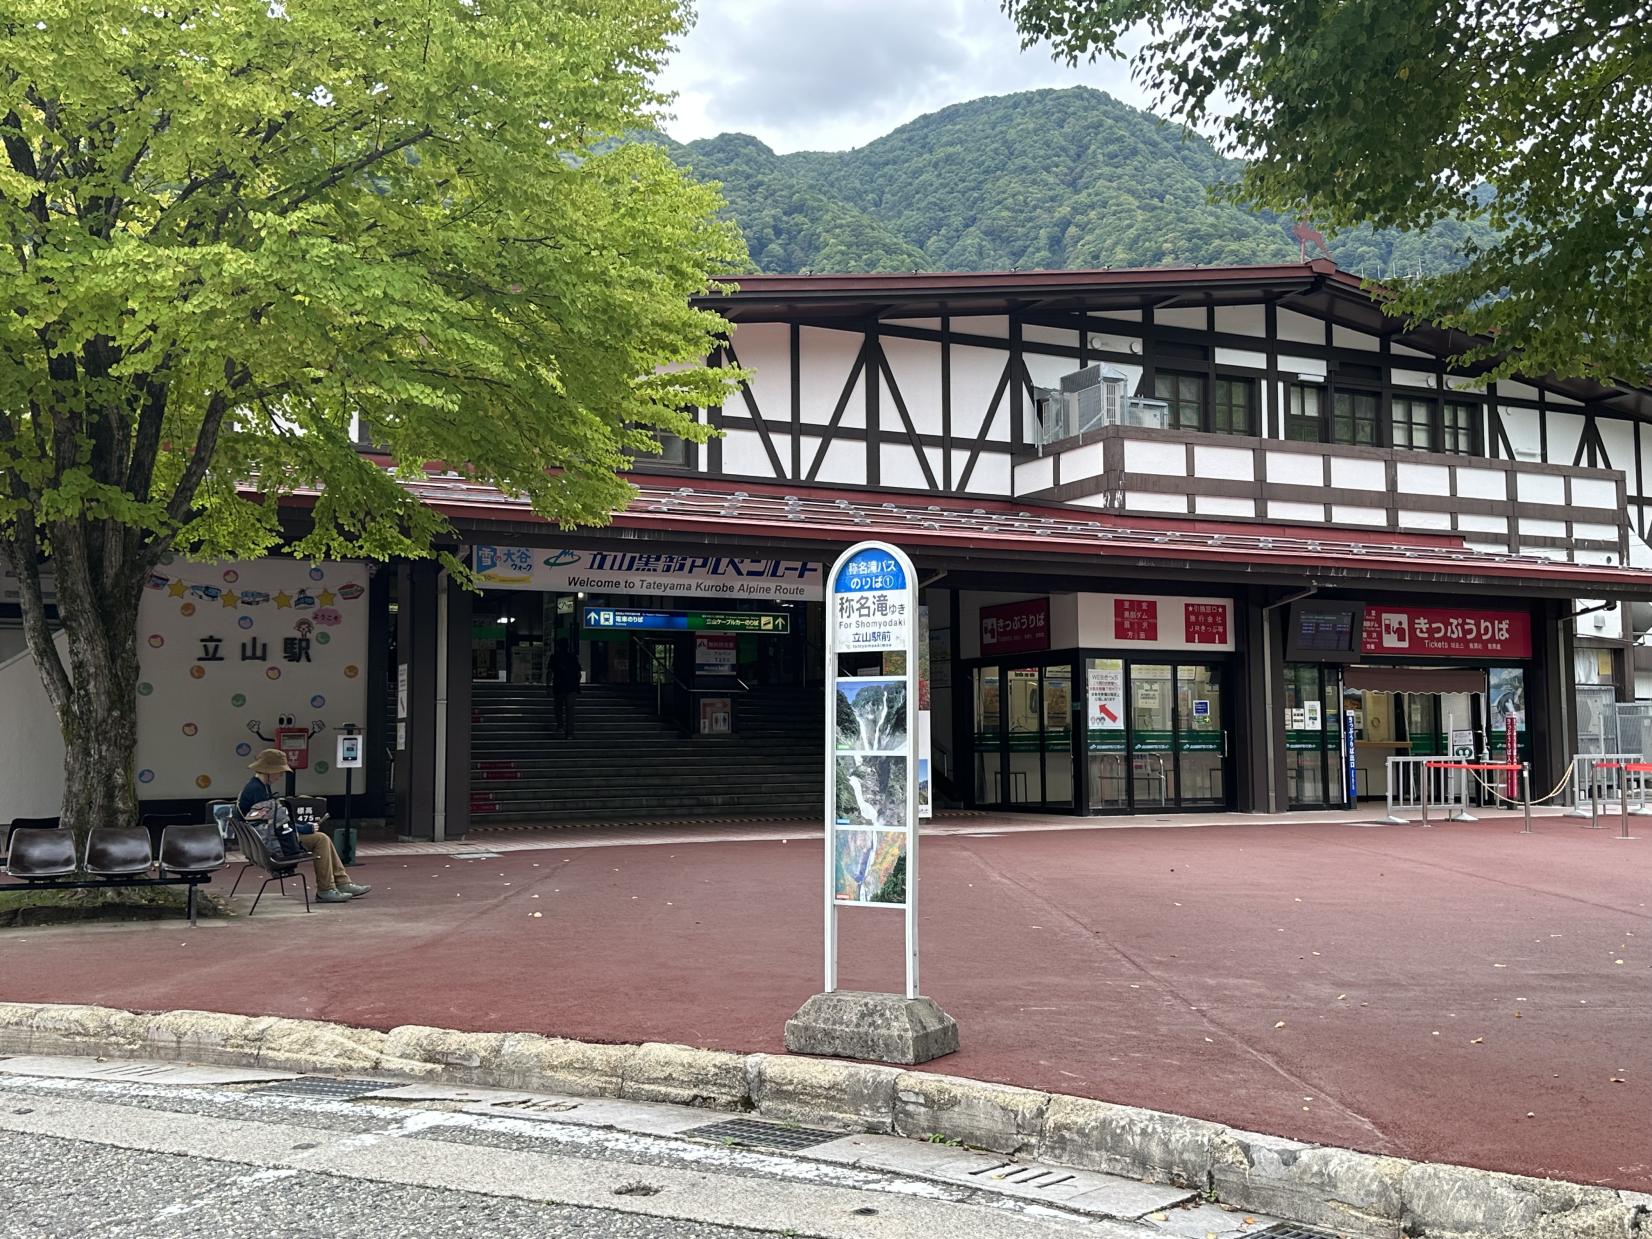 Tateyama Station: A Quaint Spot at the Start of Your Journey-0